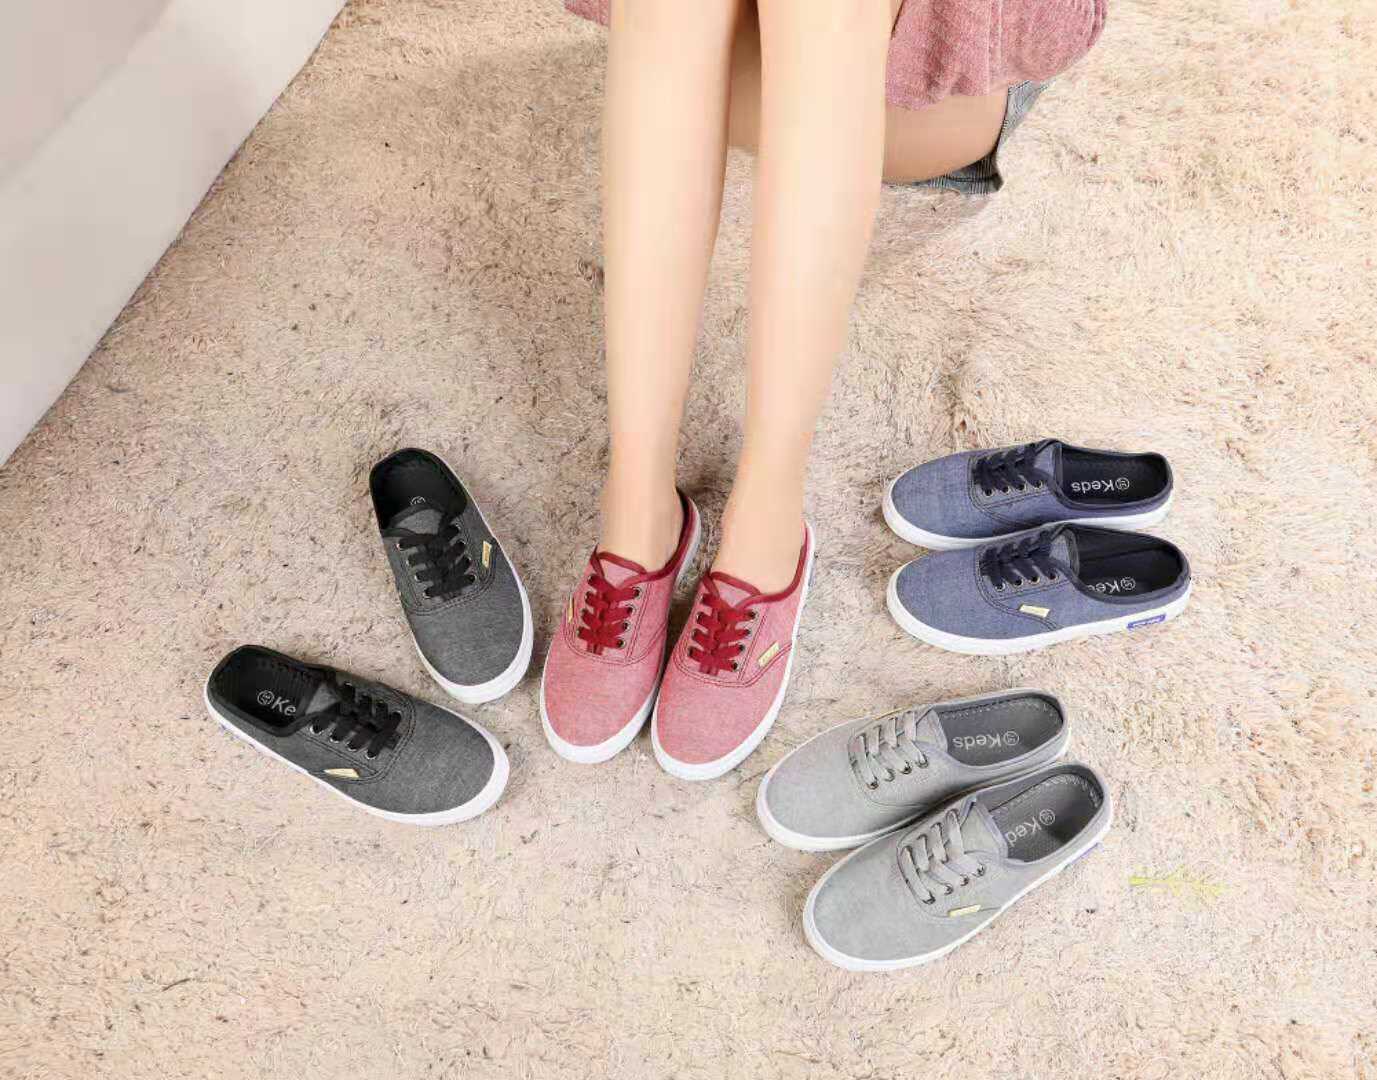 191 oxford shoes